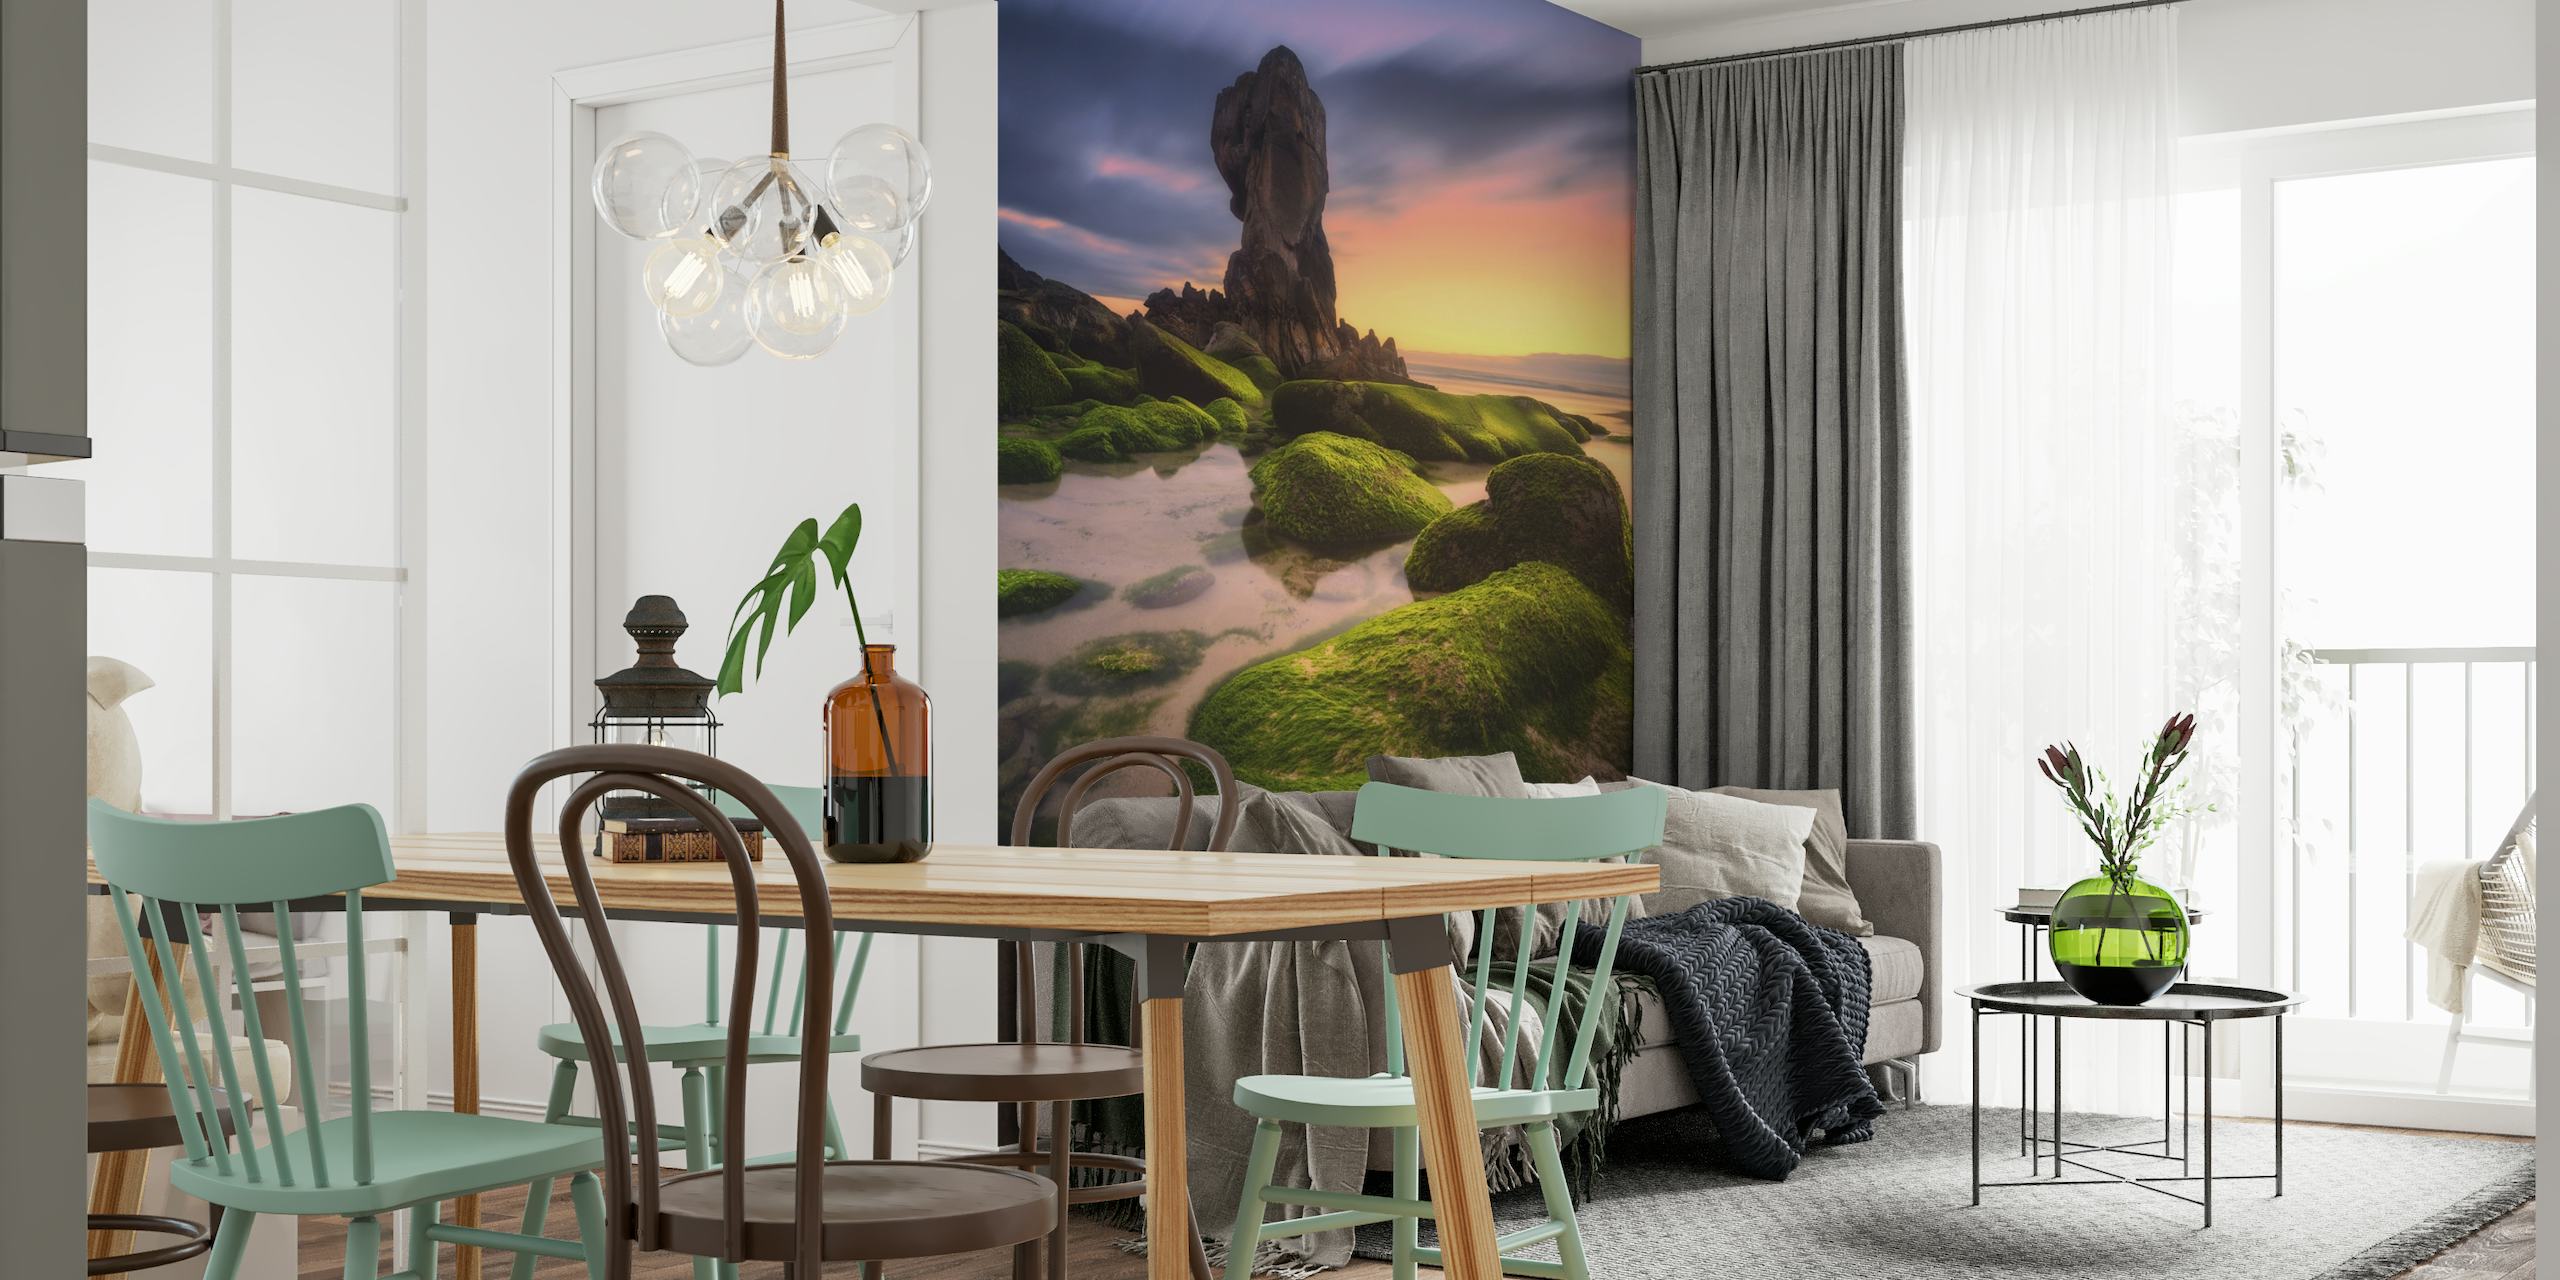 Lumeboo wall mural depicting a towering rock formation and sunset